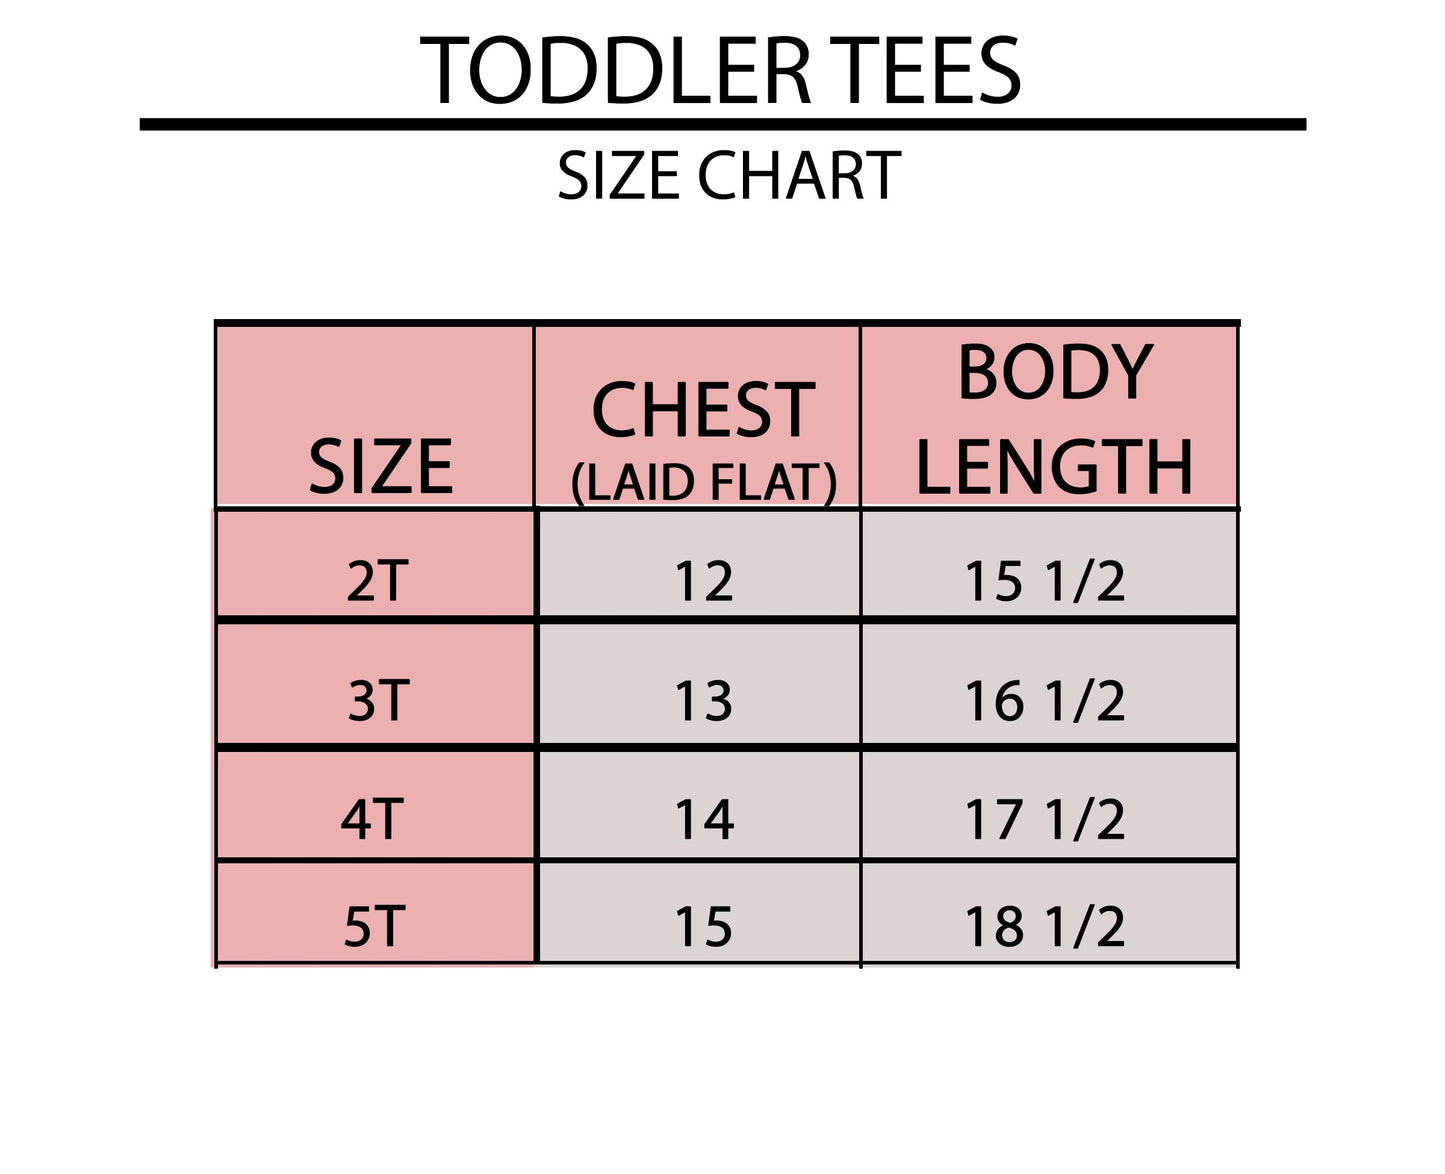 Checkered Stay Spooky Ghost | Toddler Short Sleeve Crew Neck